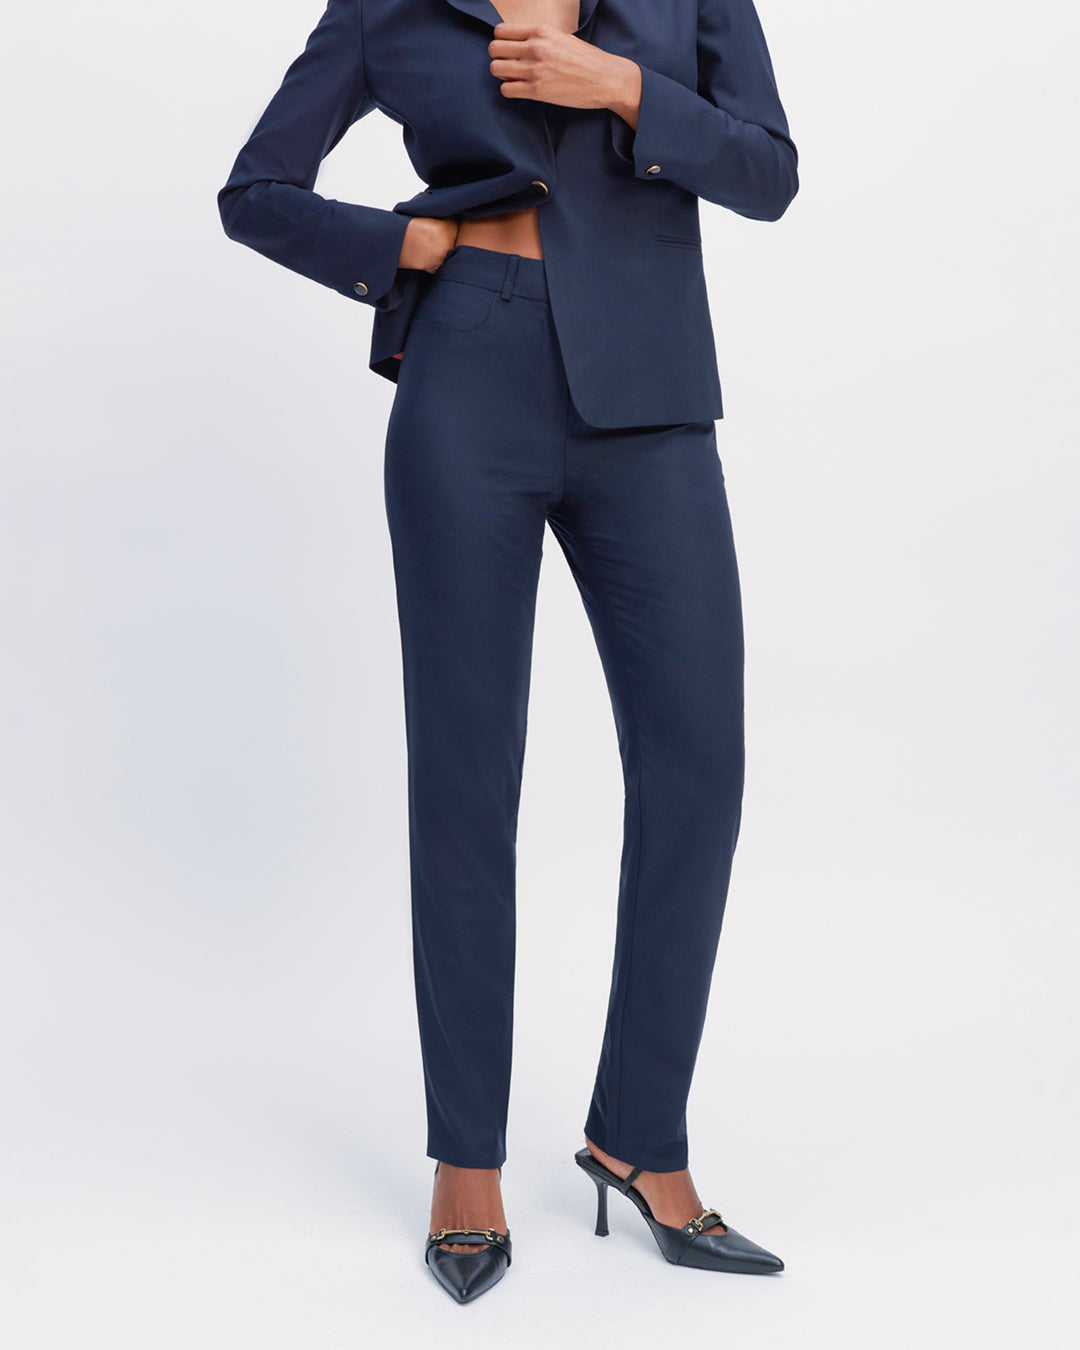 Tailored-blazer-jacket-blue-grey-curved-tailored-collar-length-under-the-bottom-two-pockets-under-the-bottom-two-pockets-17H10-tailors-for-women-paris-